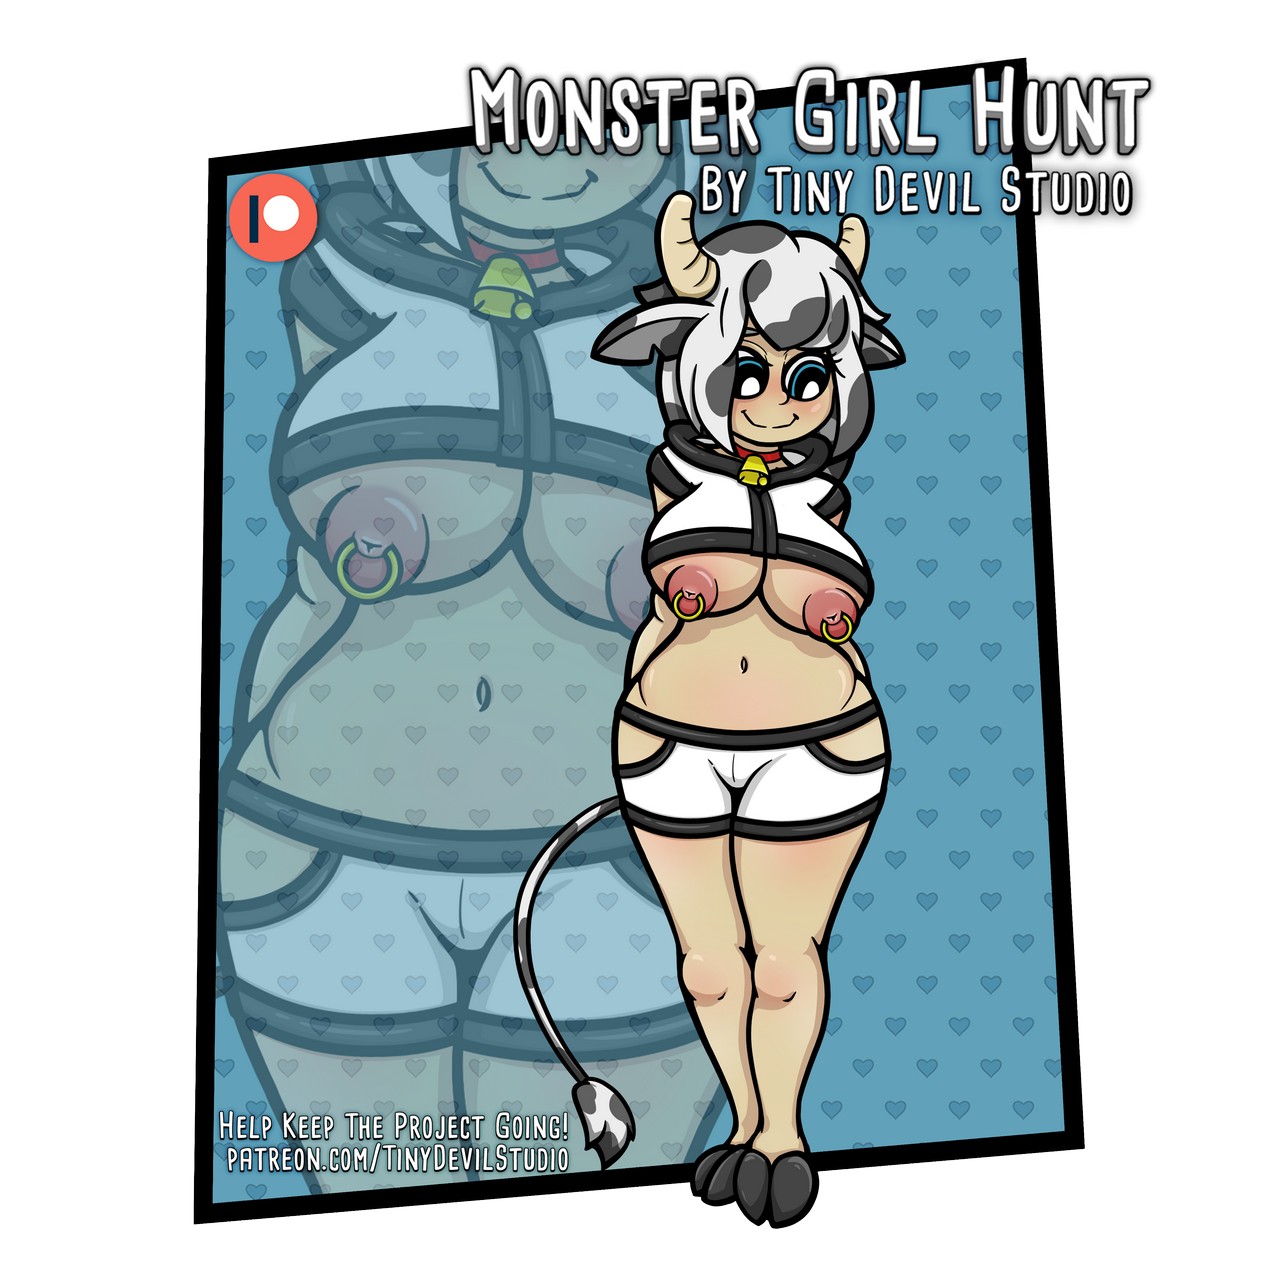 Monster Girl Hunt 0 2 50 Out To All Patrons Links In Comment